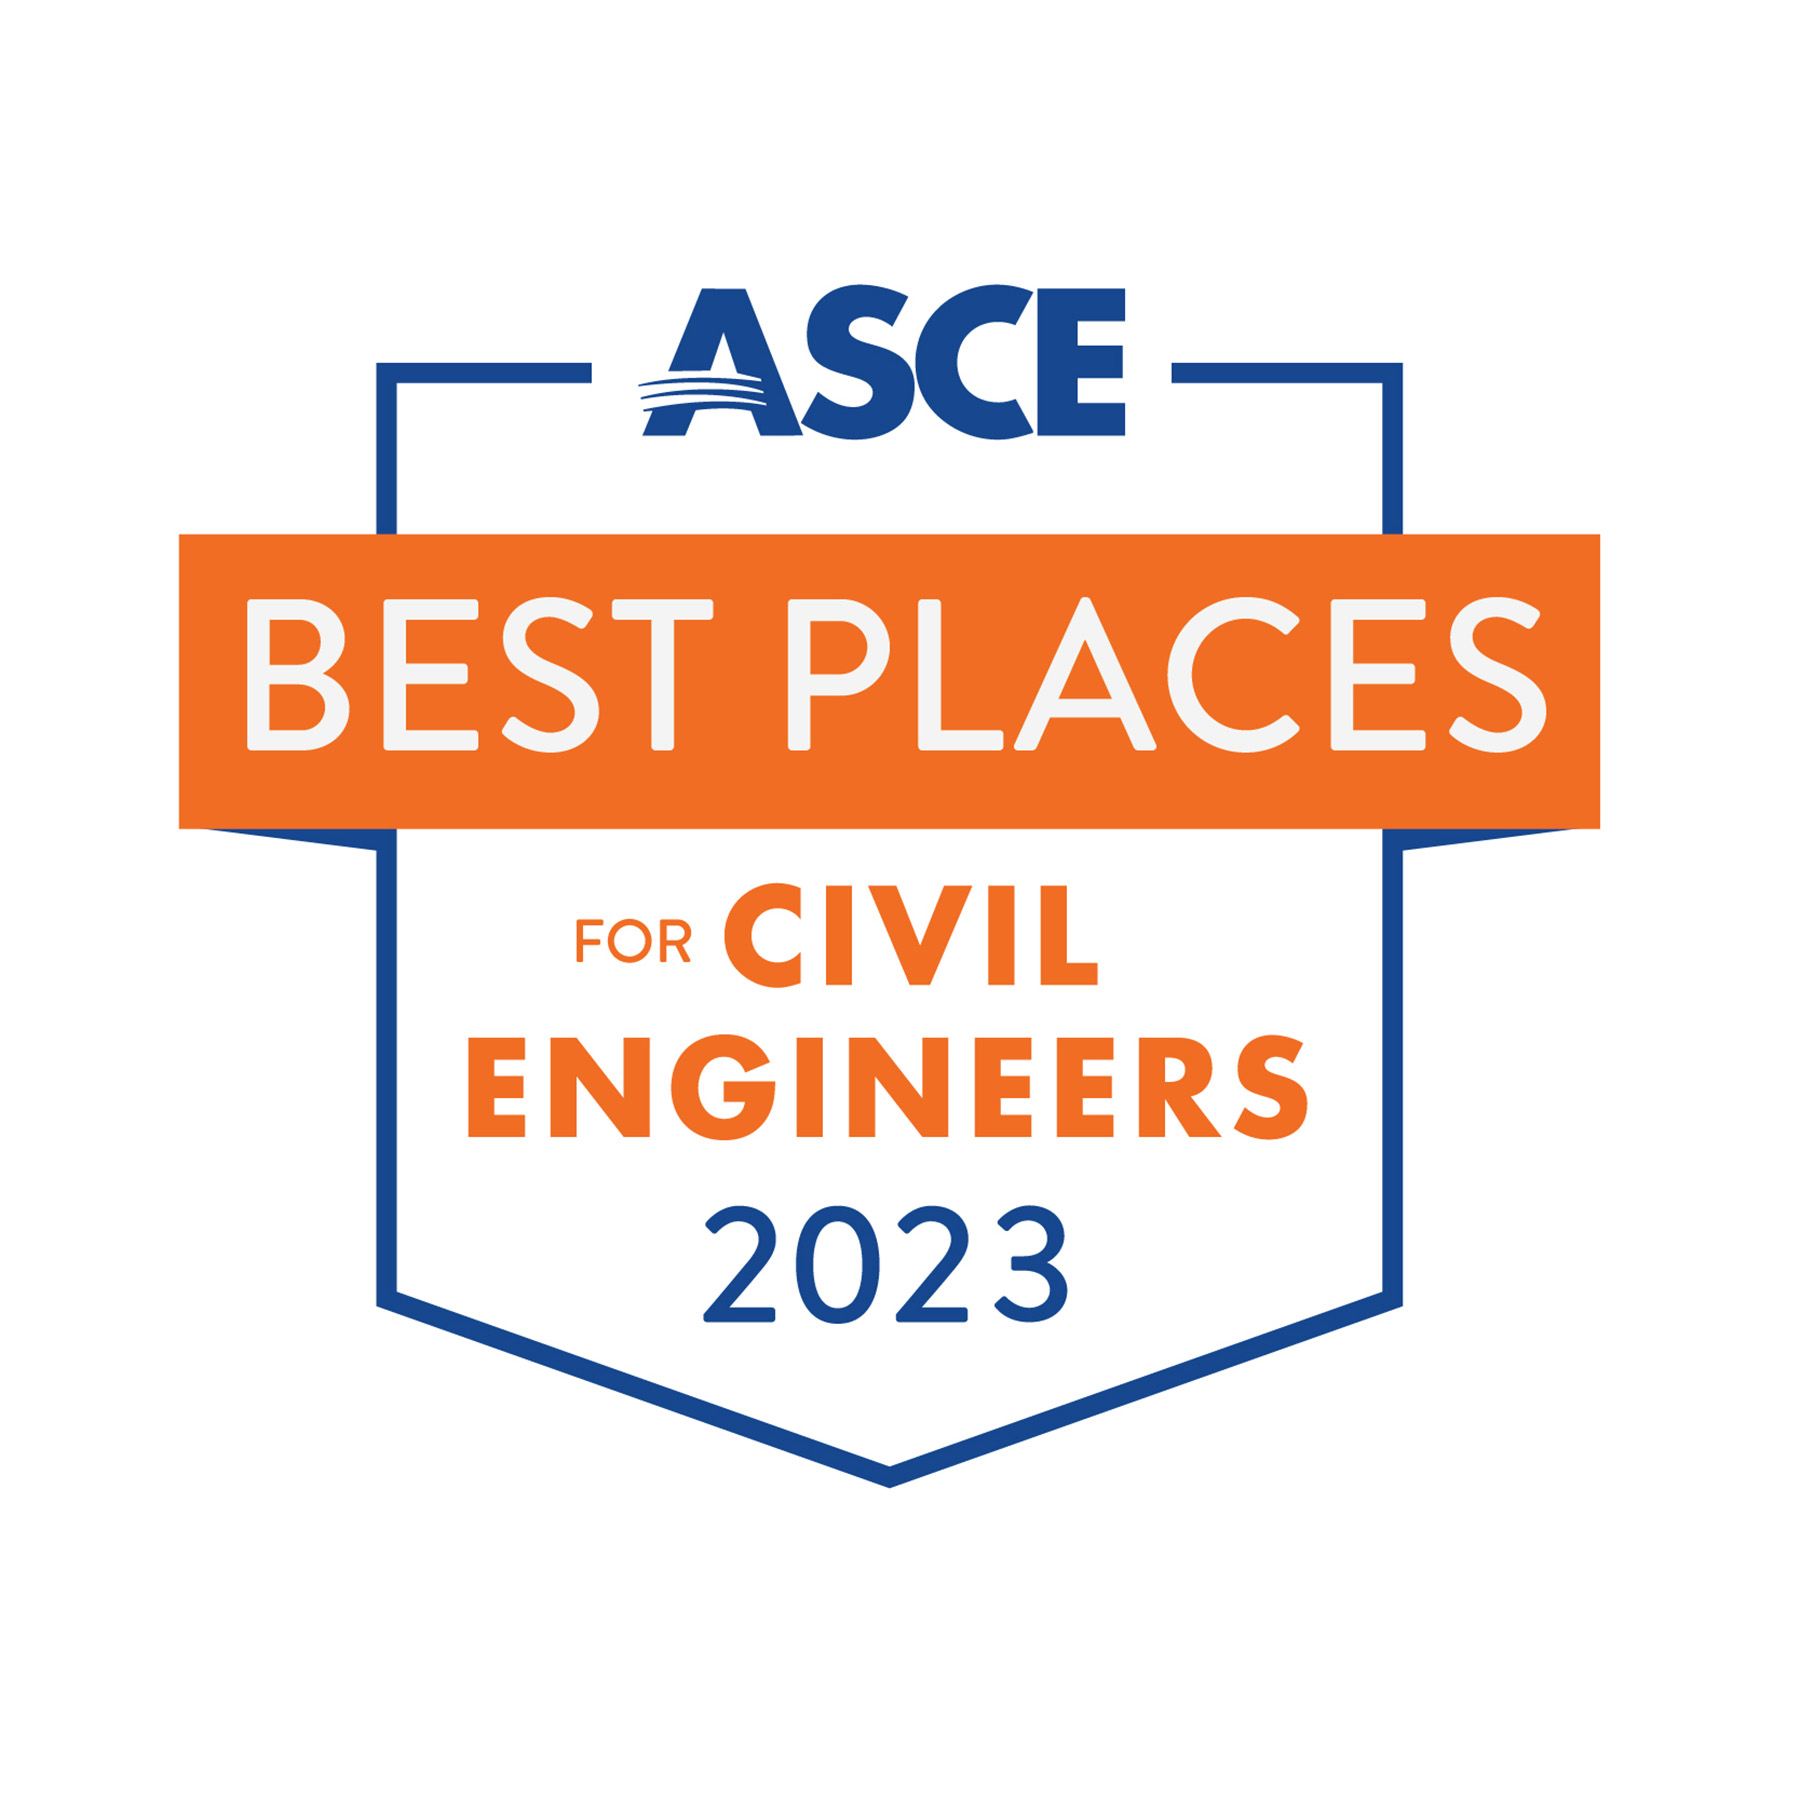 Four-sided image shows the logo for ASCE best places for civil engineers 2023.